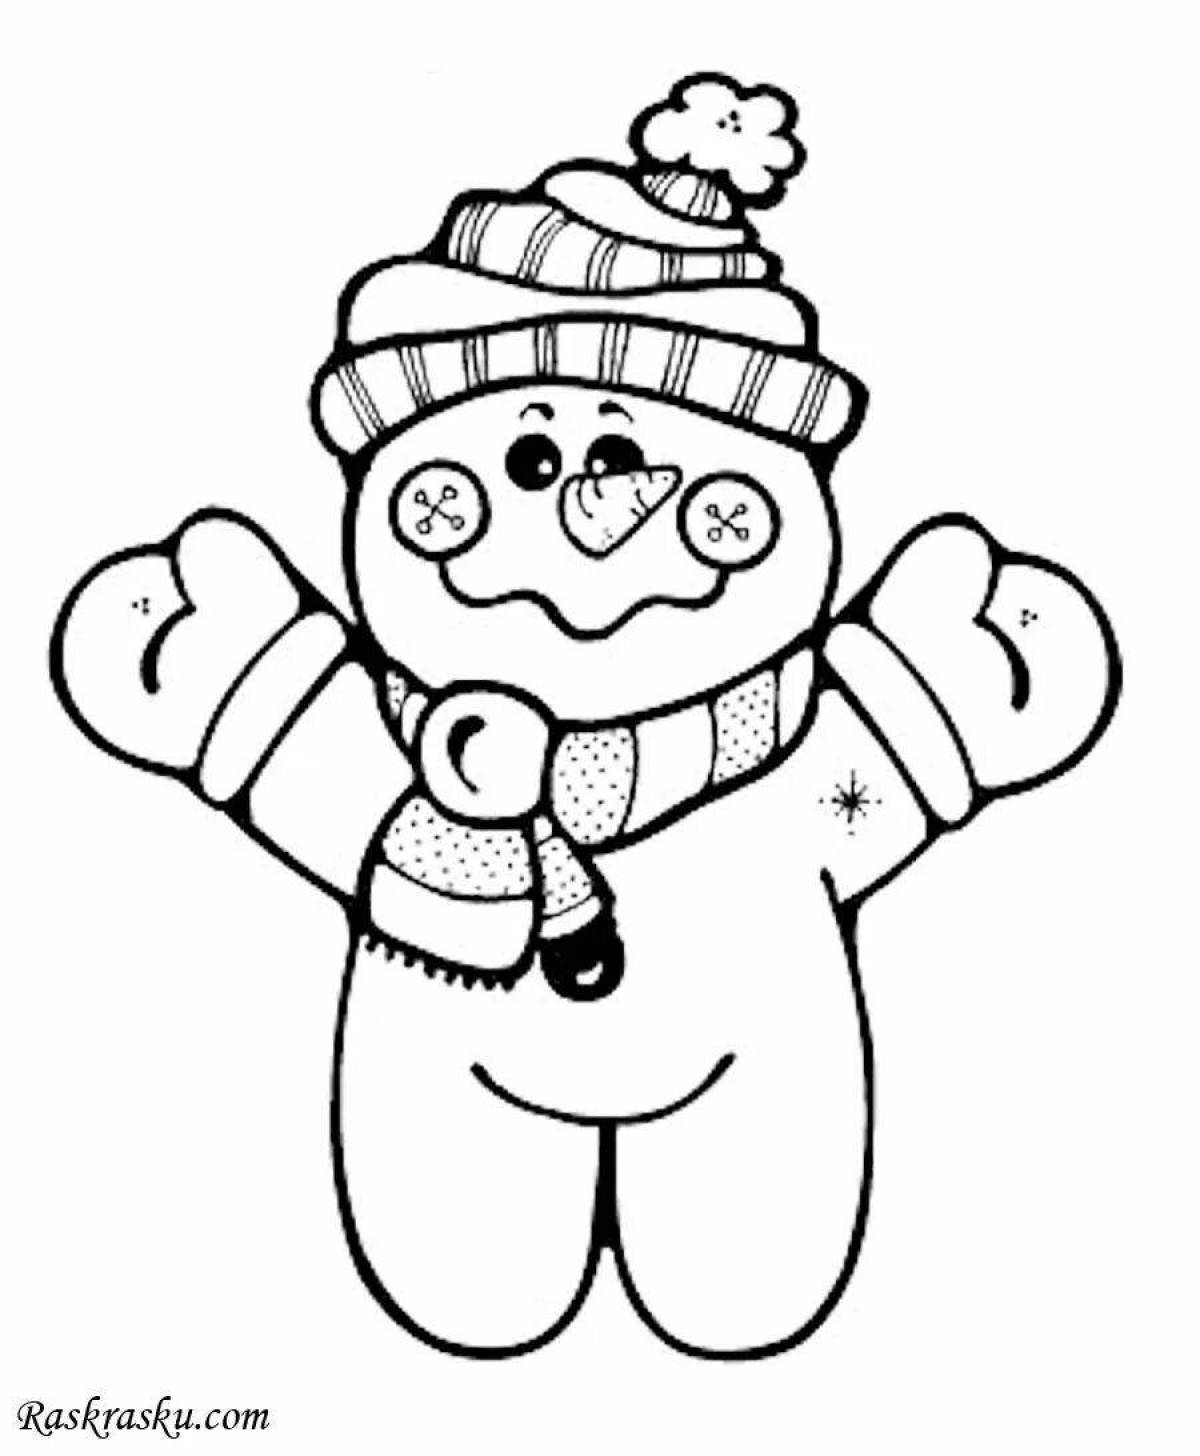 Naughty coloring cute snowman